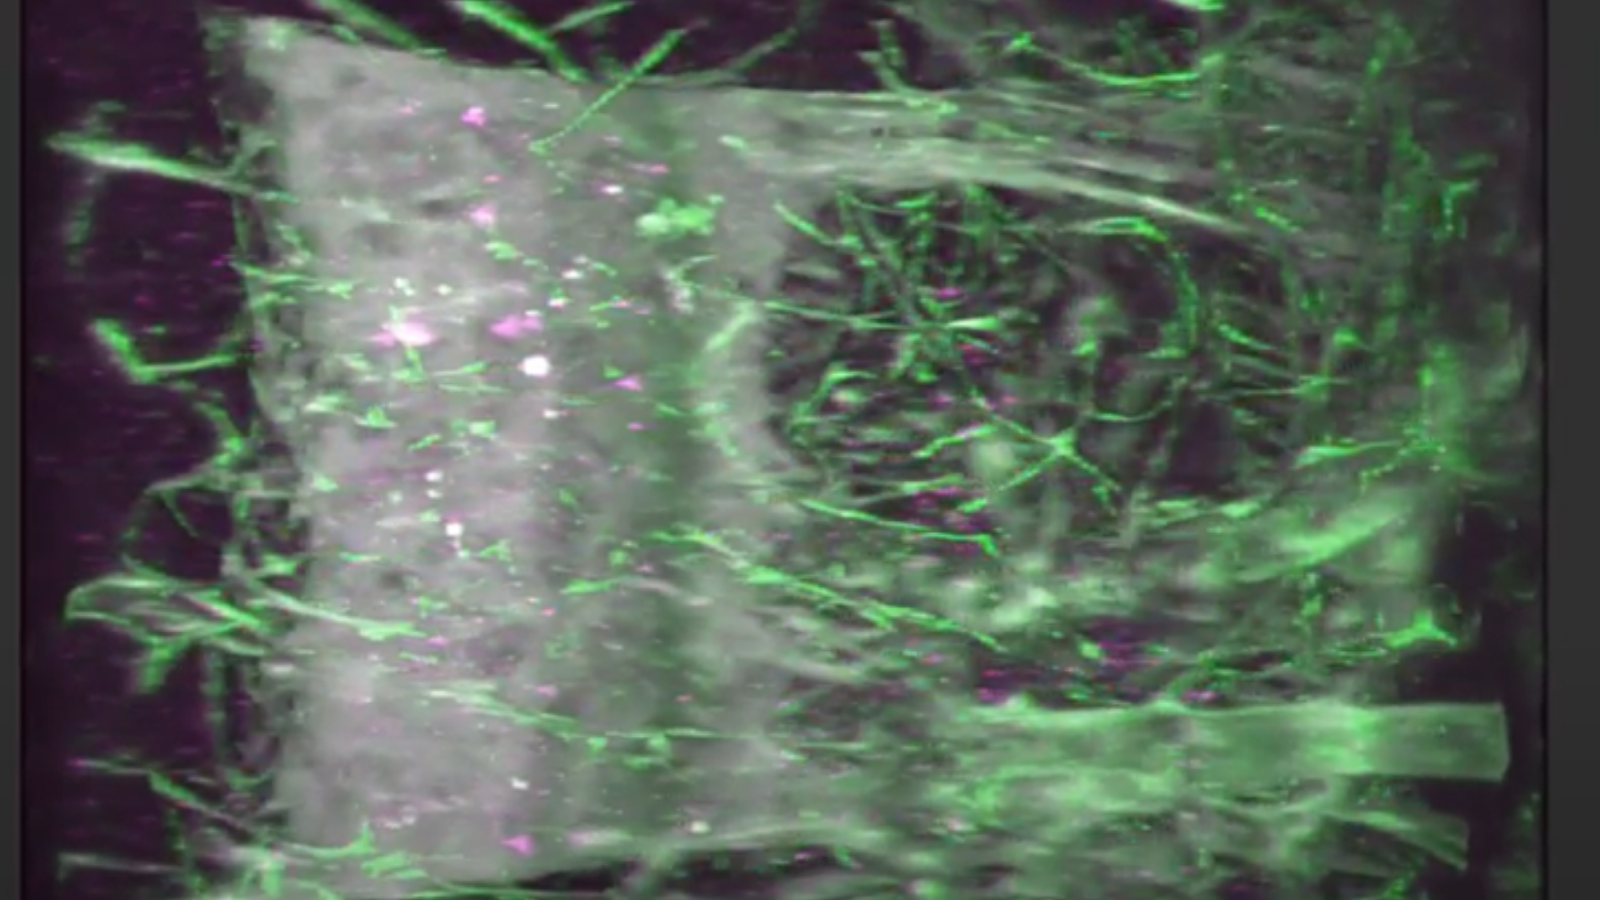 lightsheet image from University of Florida's, Seth Currlin, showing the neural network (green) within a human thymus, where the cells that fight infection mature.